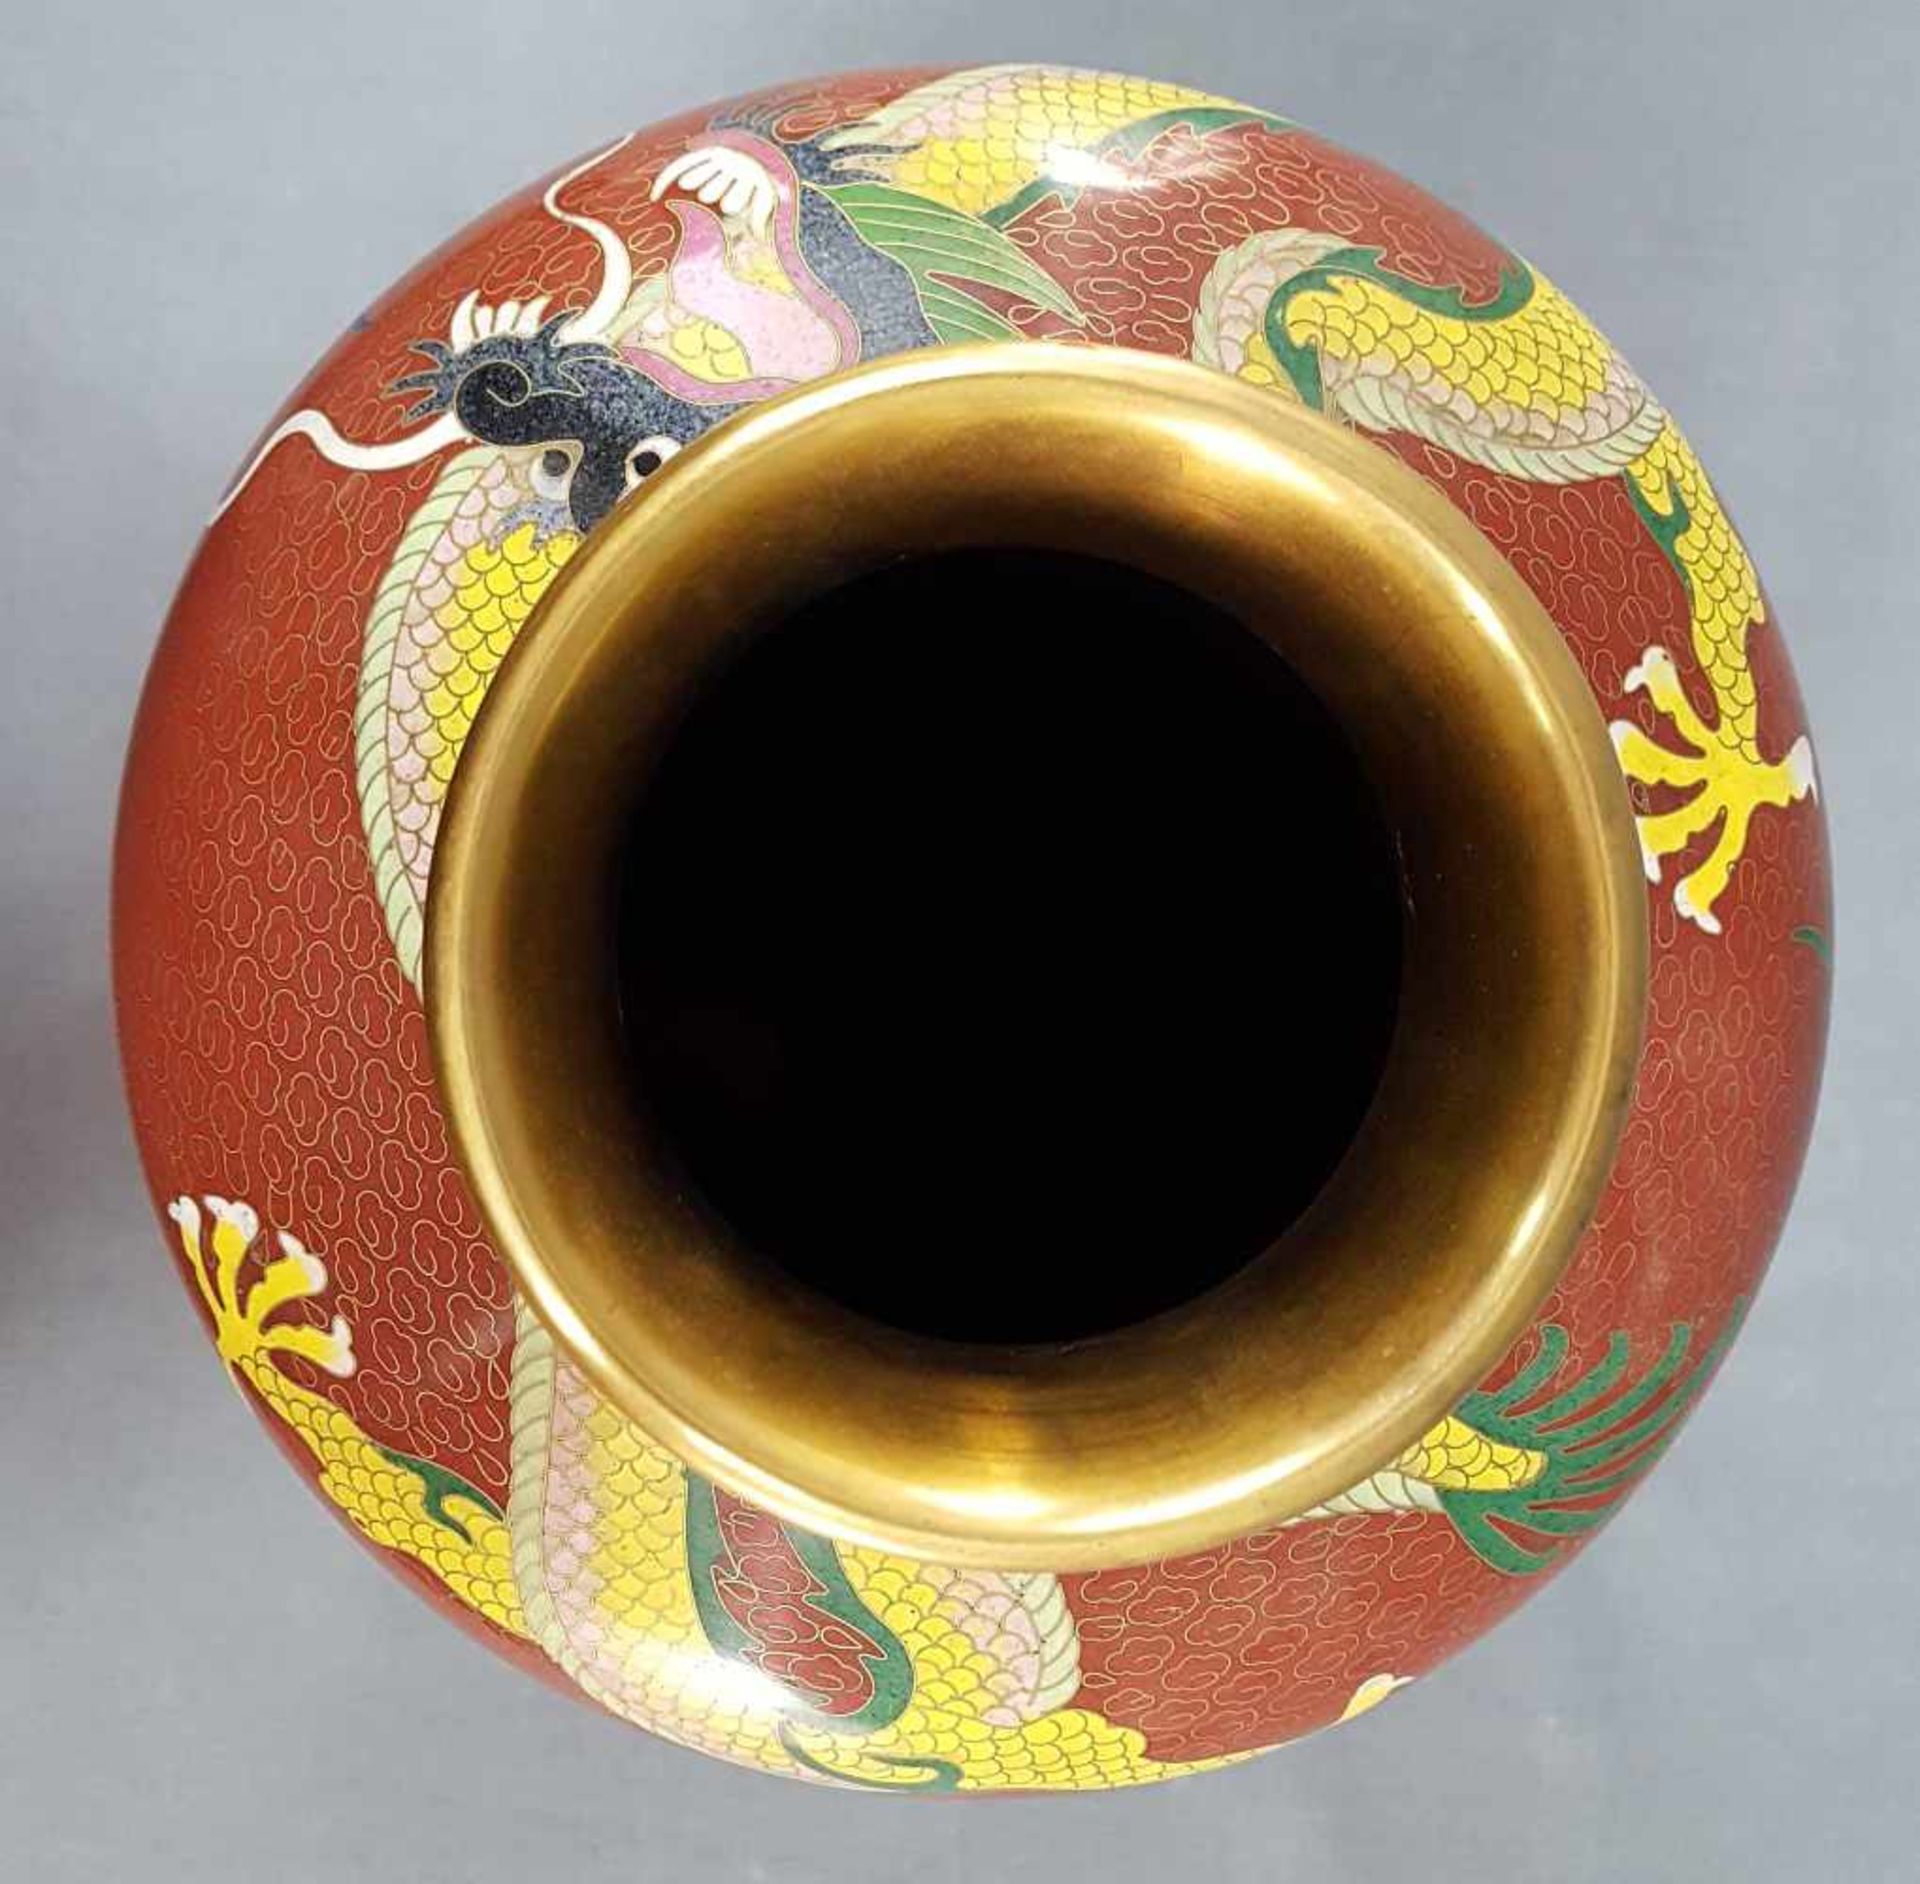 Cloisonne vase with imperial yellow dragon. - Image 5 of 6